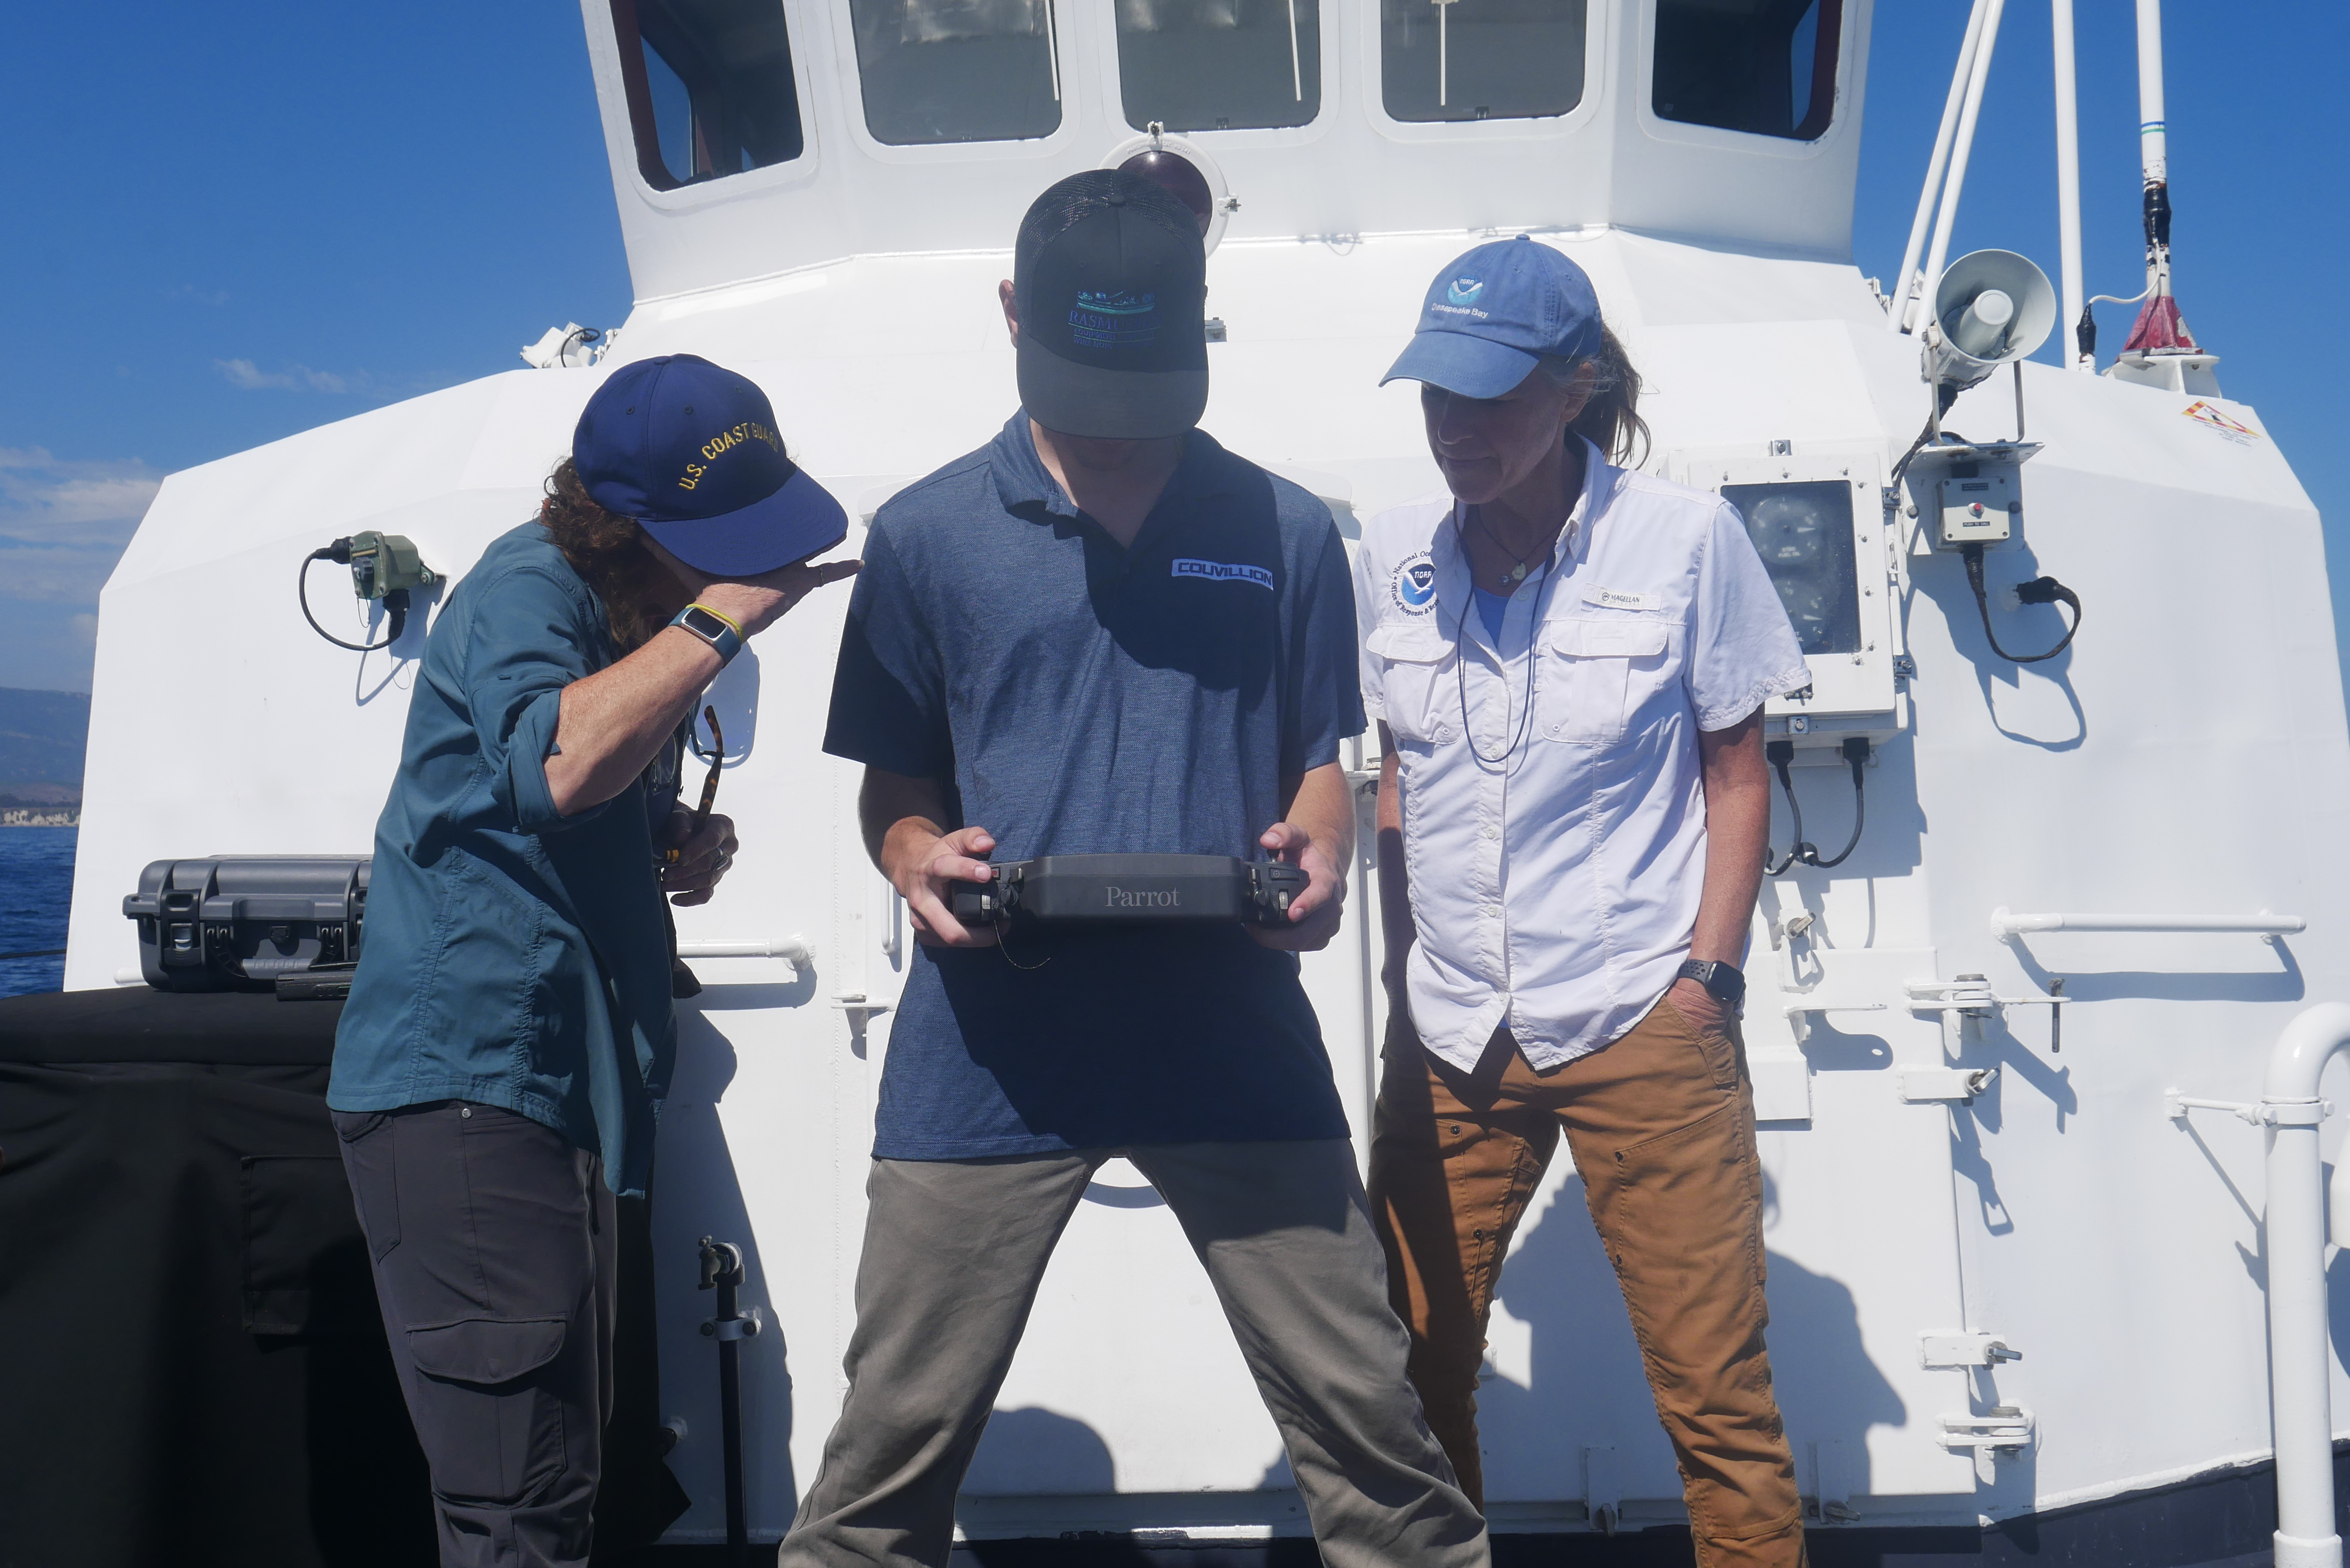 Project team members aboard a response vessel, observing a UAS pilot's flight within its remote controller's screen.